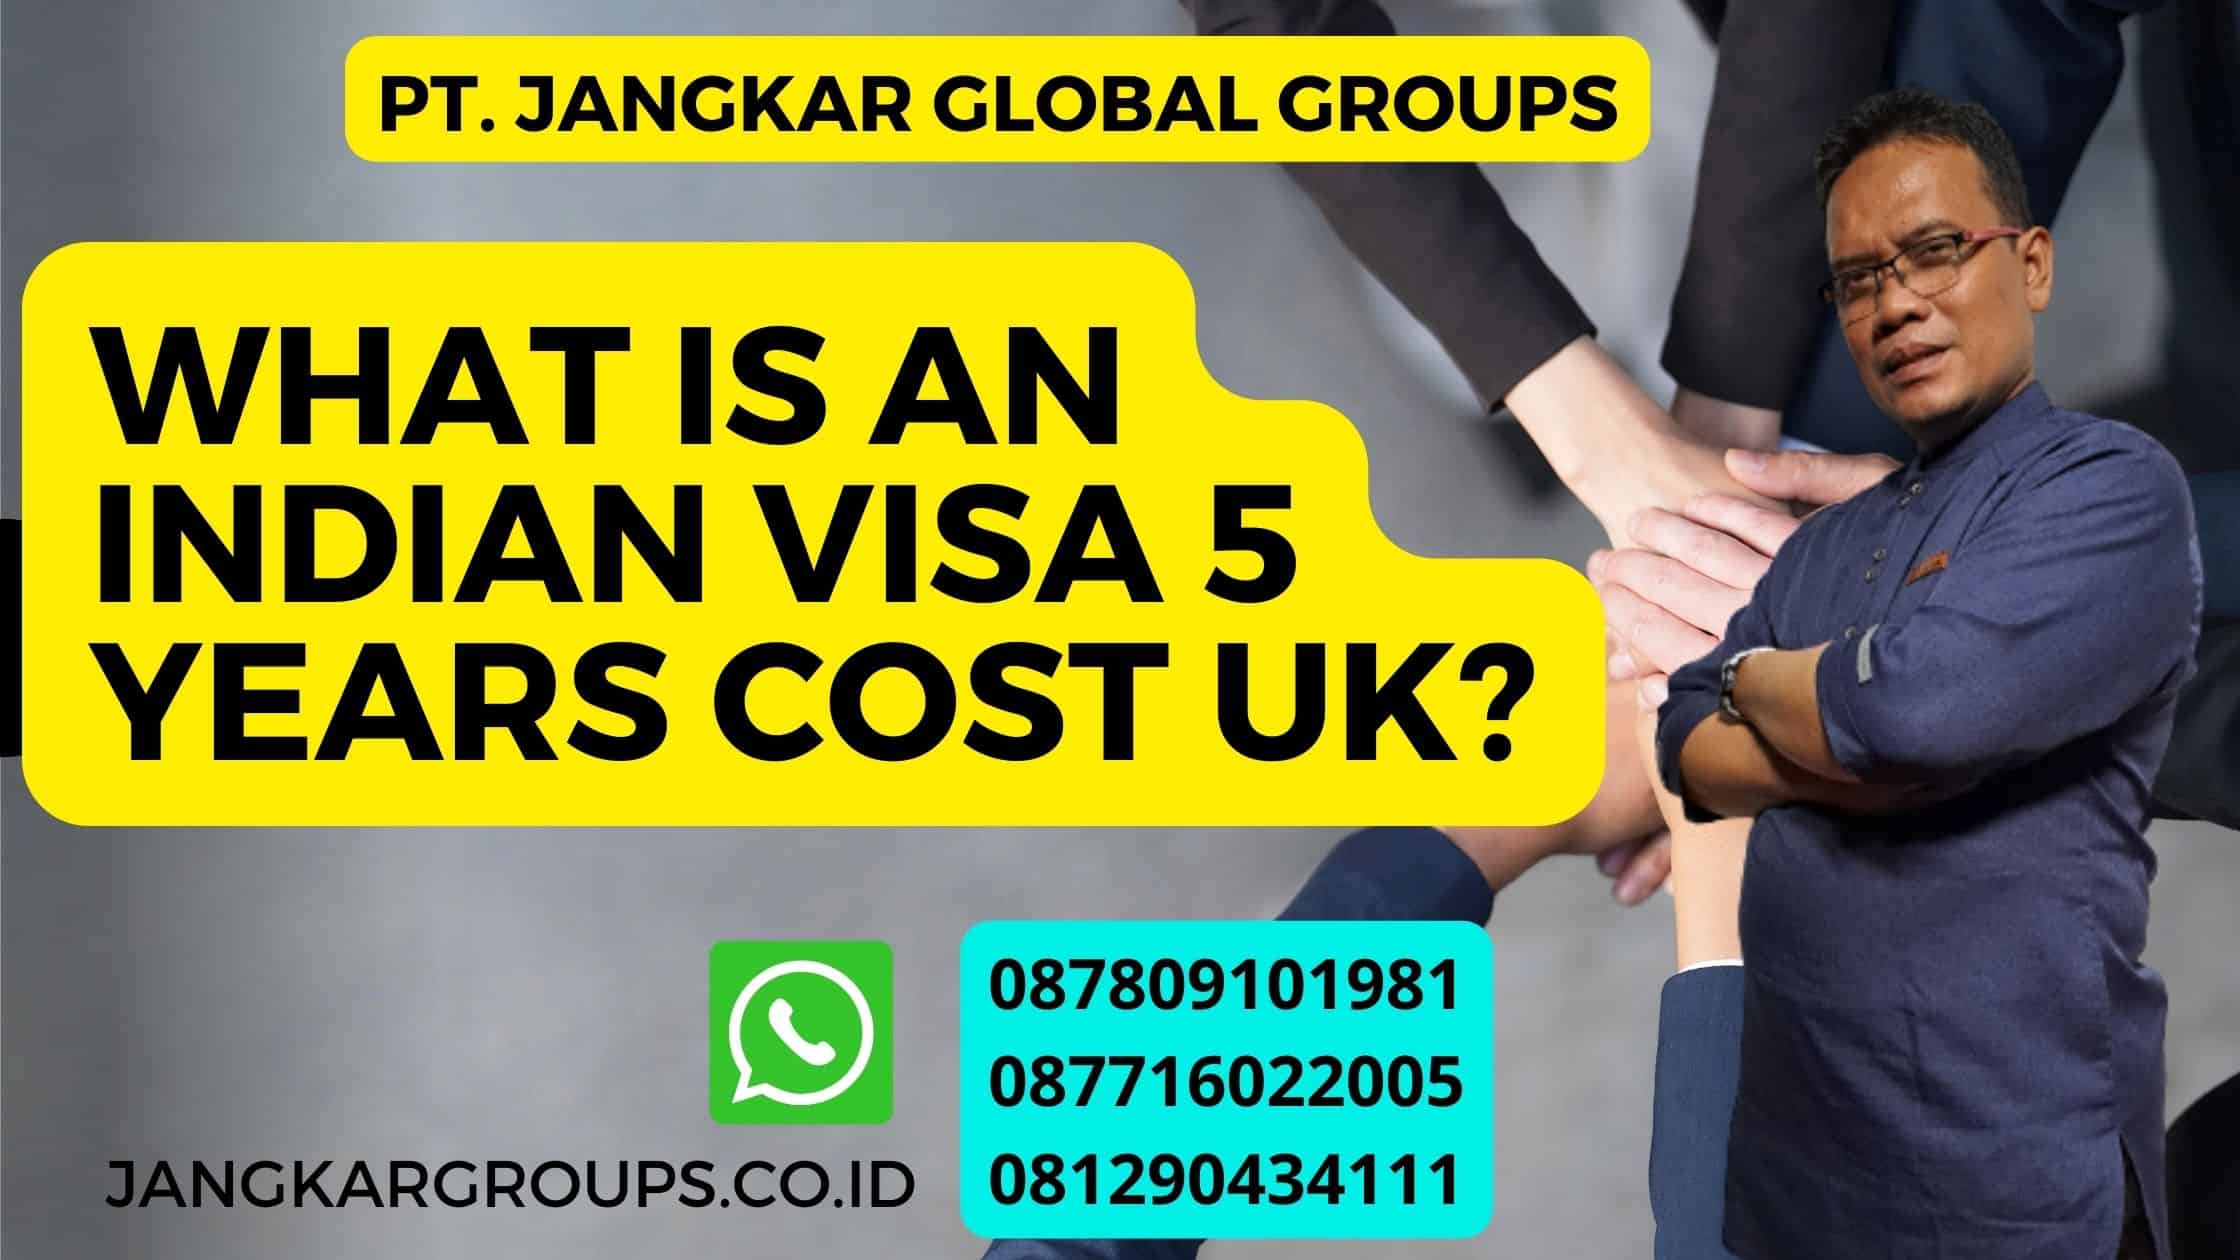 What is an Indian visa 5 years cost UK?